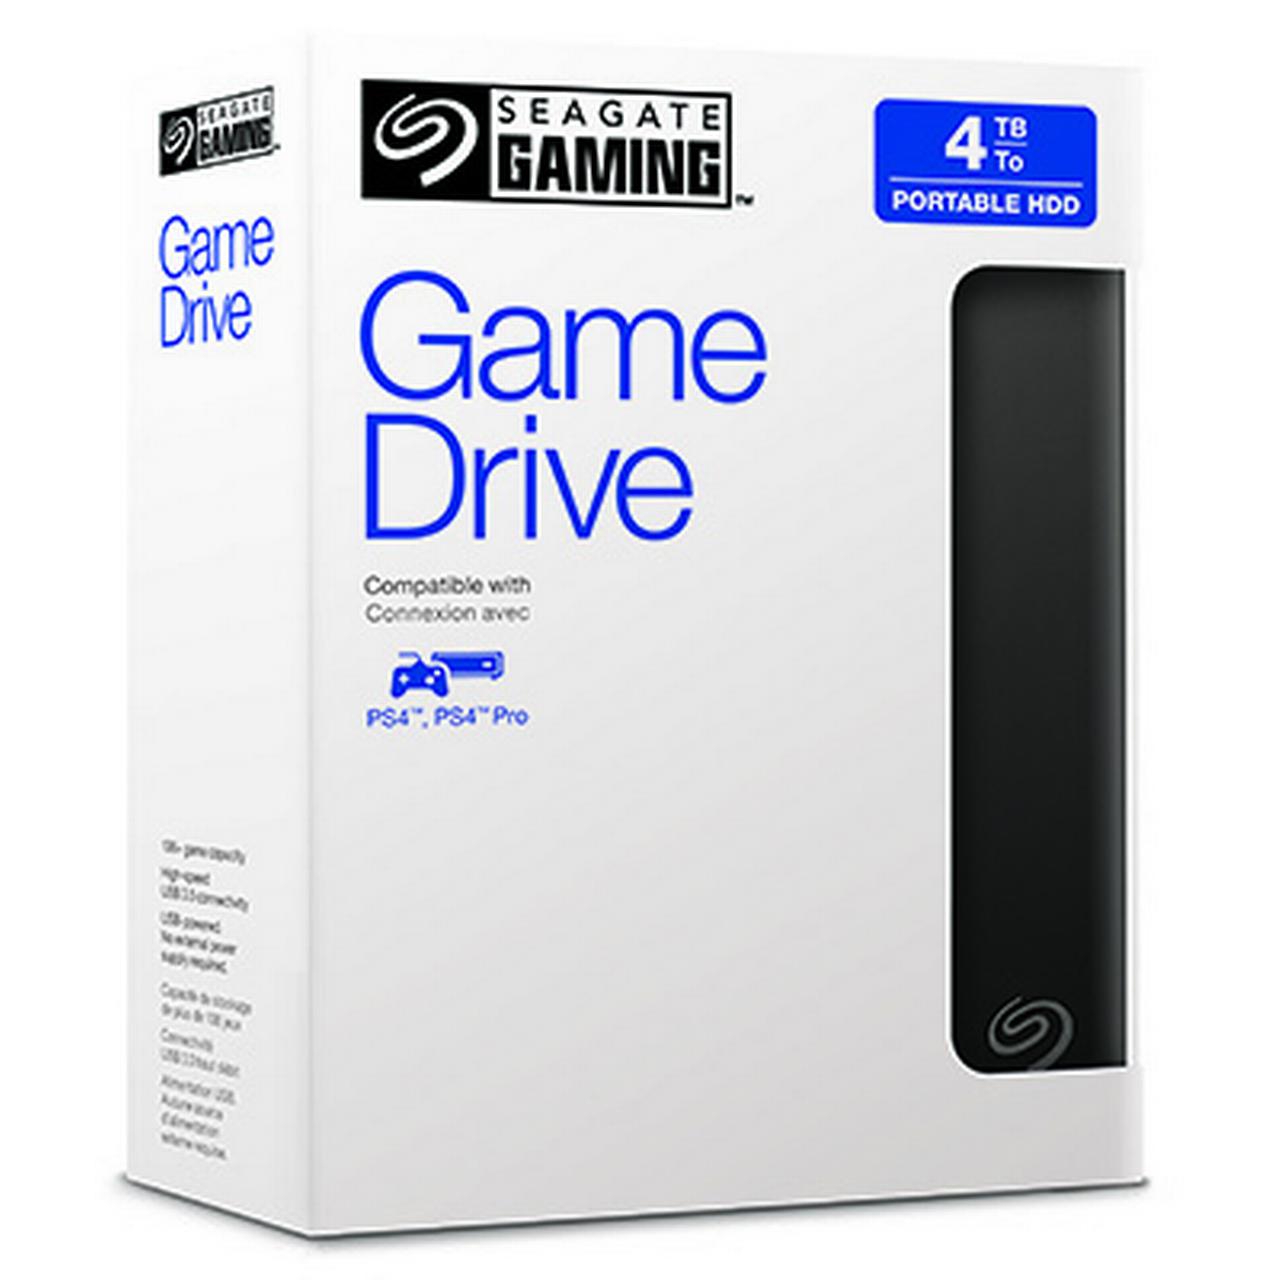 Seagate Game Drive for PlayStation 4TB External Hard Drive Portable-USB 3.0 (Black) - image 2 of 11